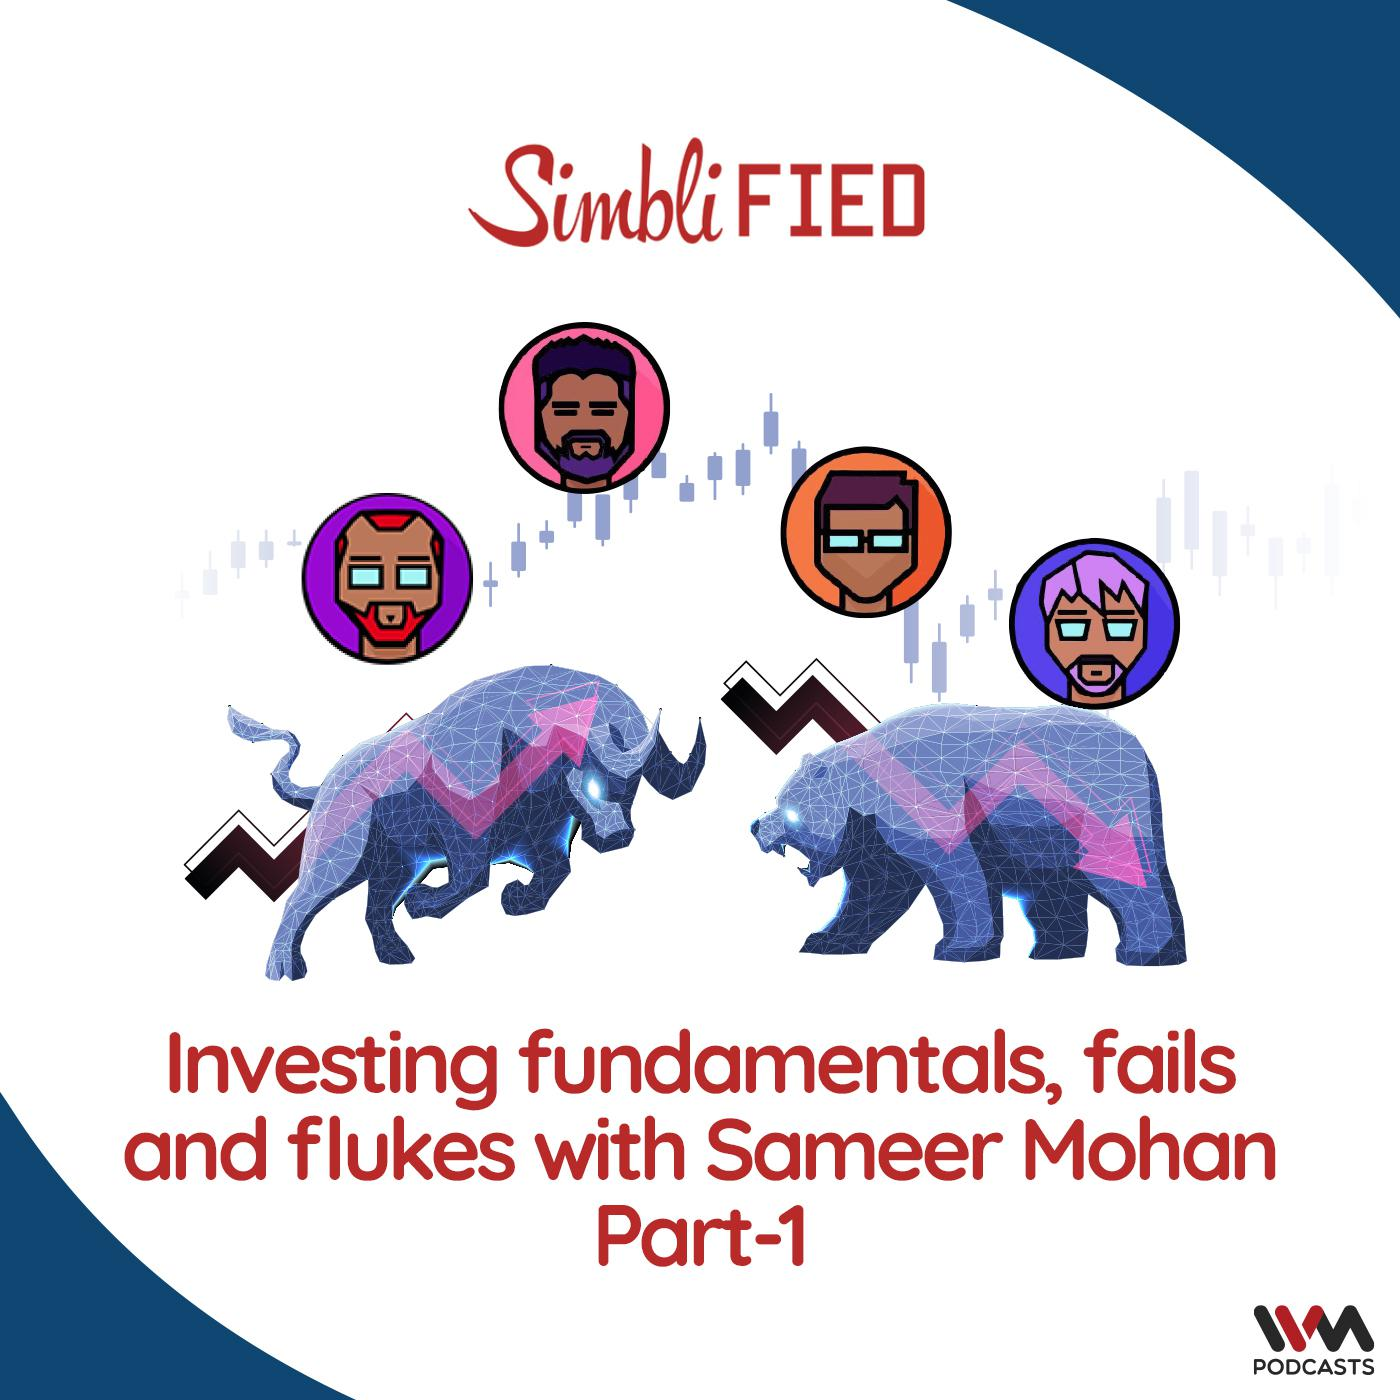 Investing fundamentals, fails and flukes with Sameer Mohan - Part 1